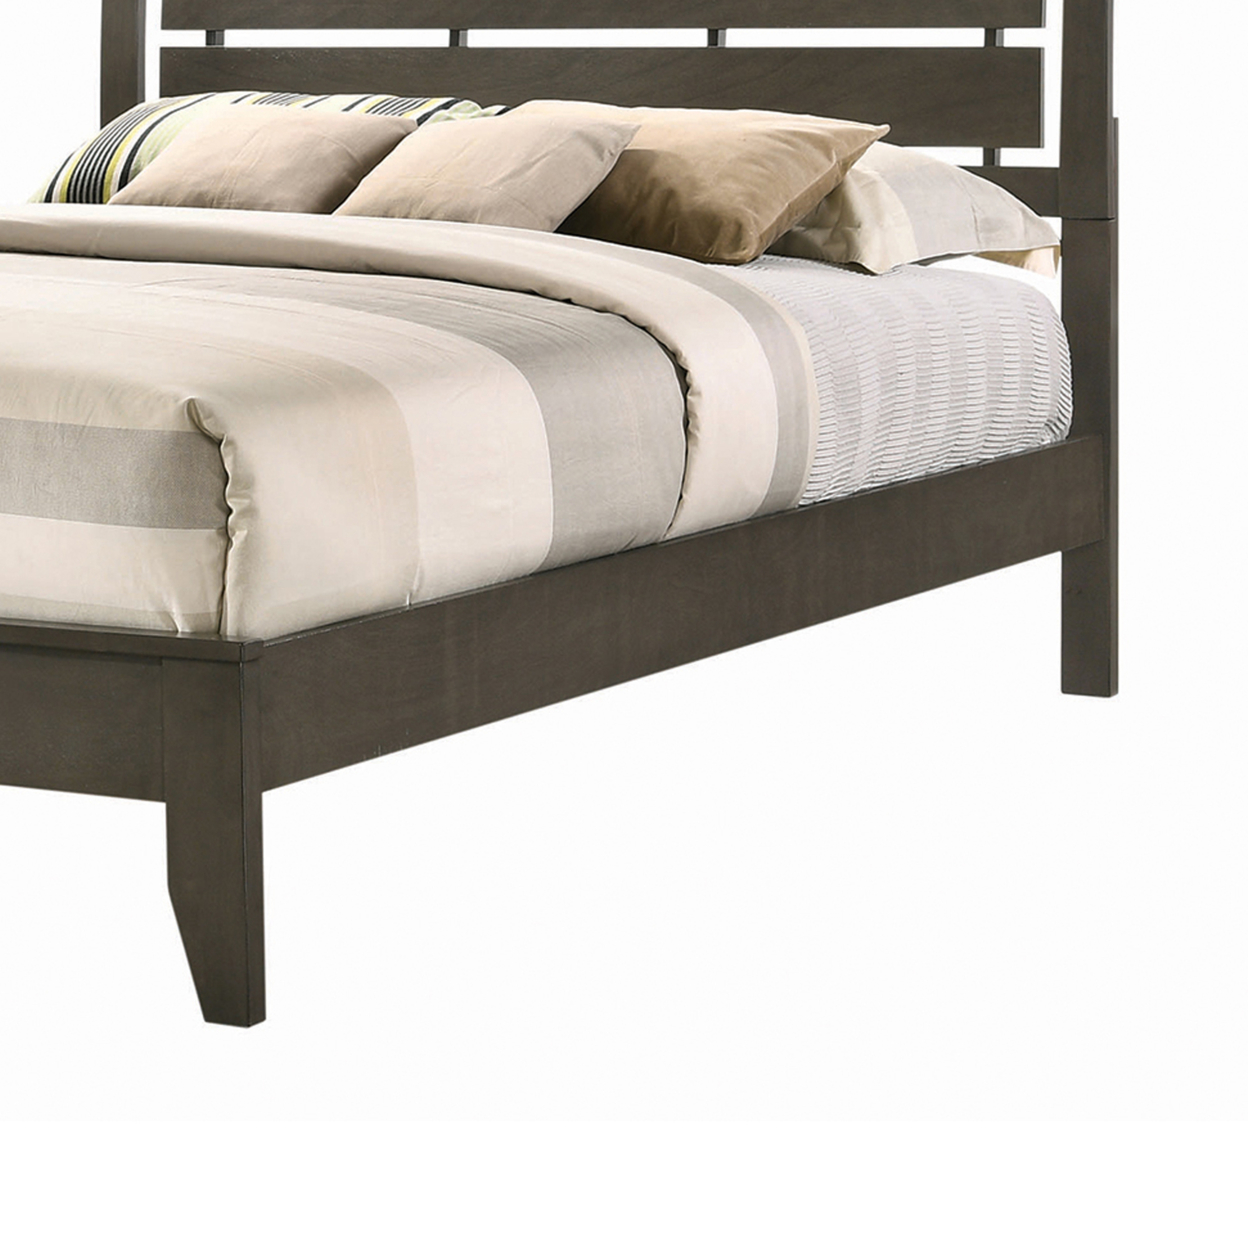 Transitional Wooden Queen Size Bed With Slatted Style Headboard, Gray- Saltoro Sherpi